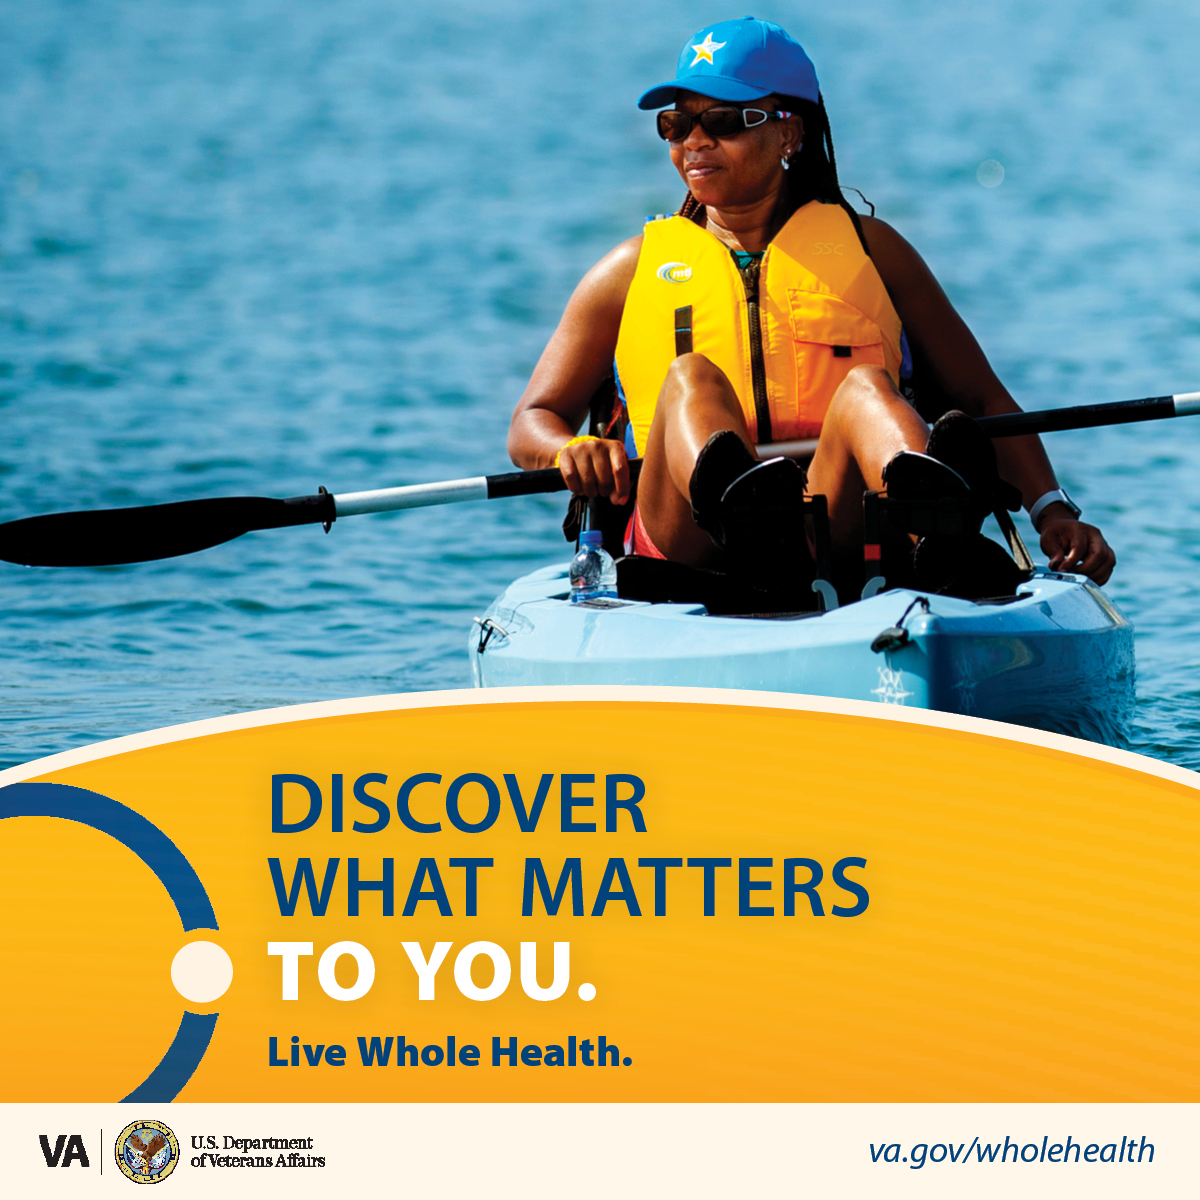 Live Whole Health Kayaking Instagram Graphic